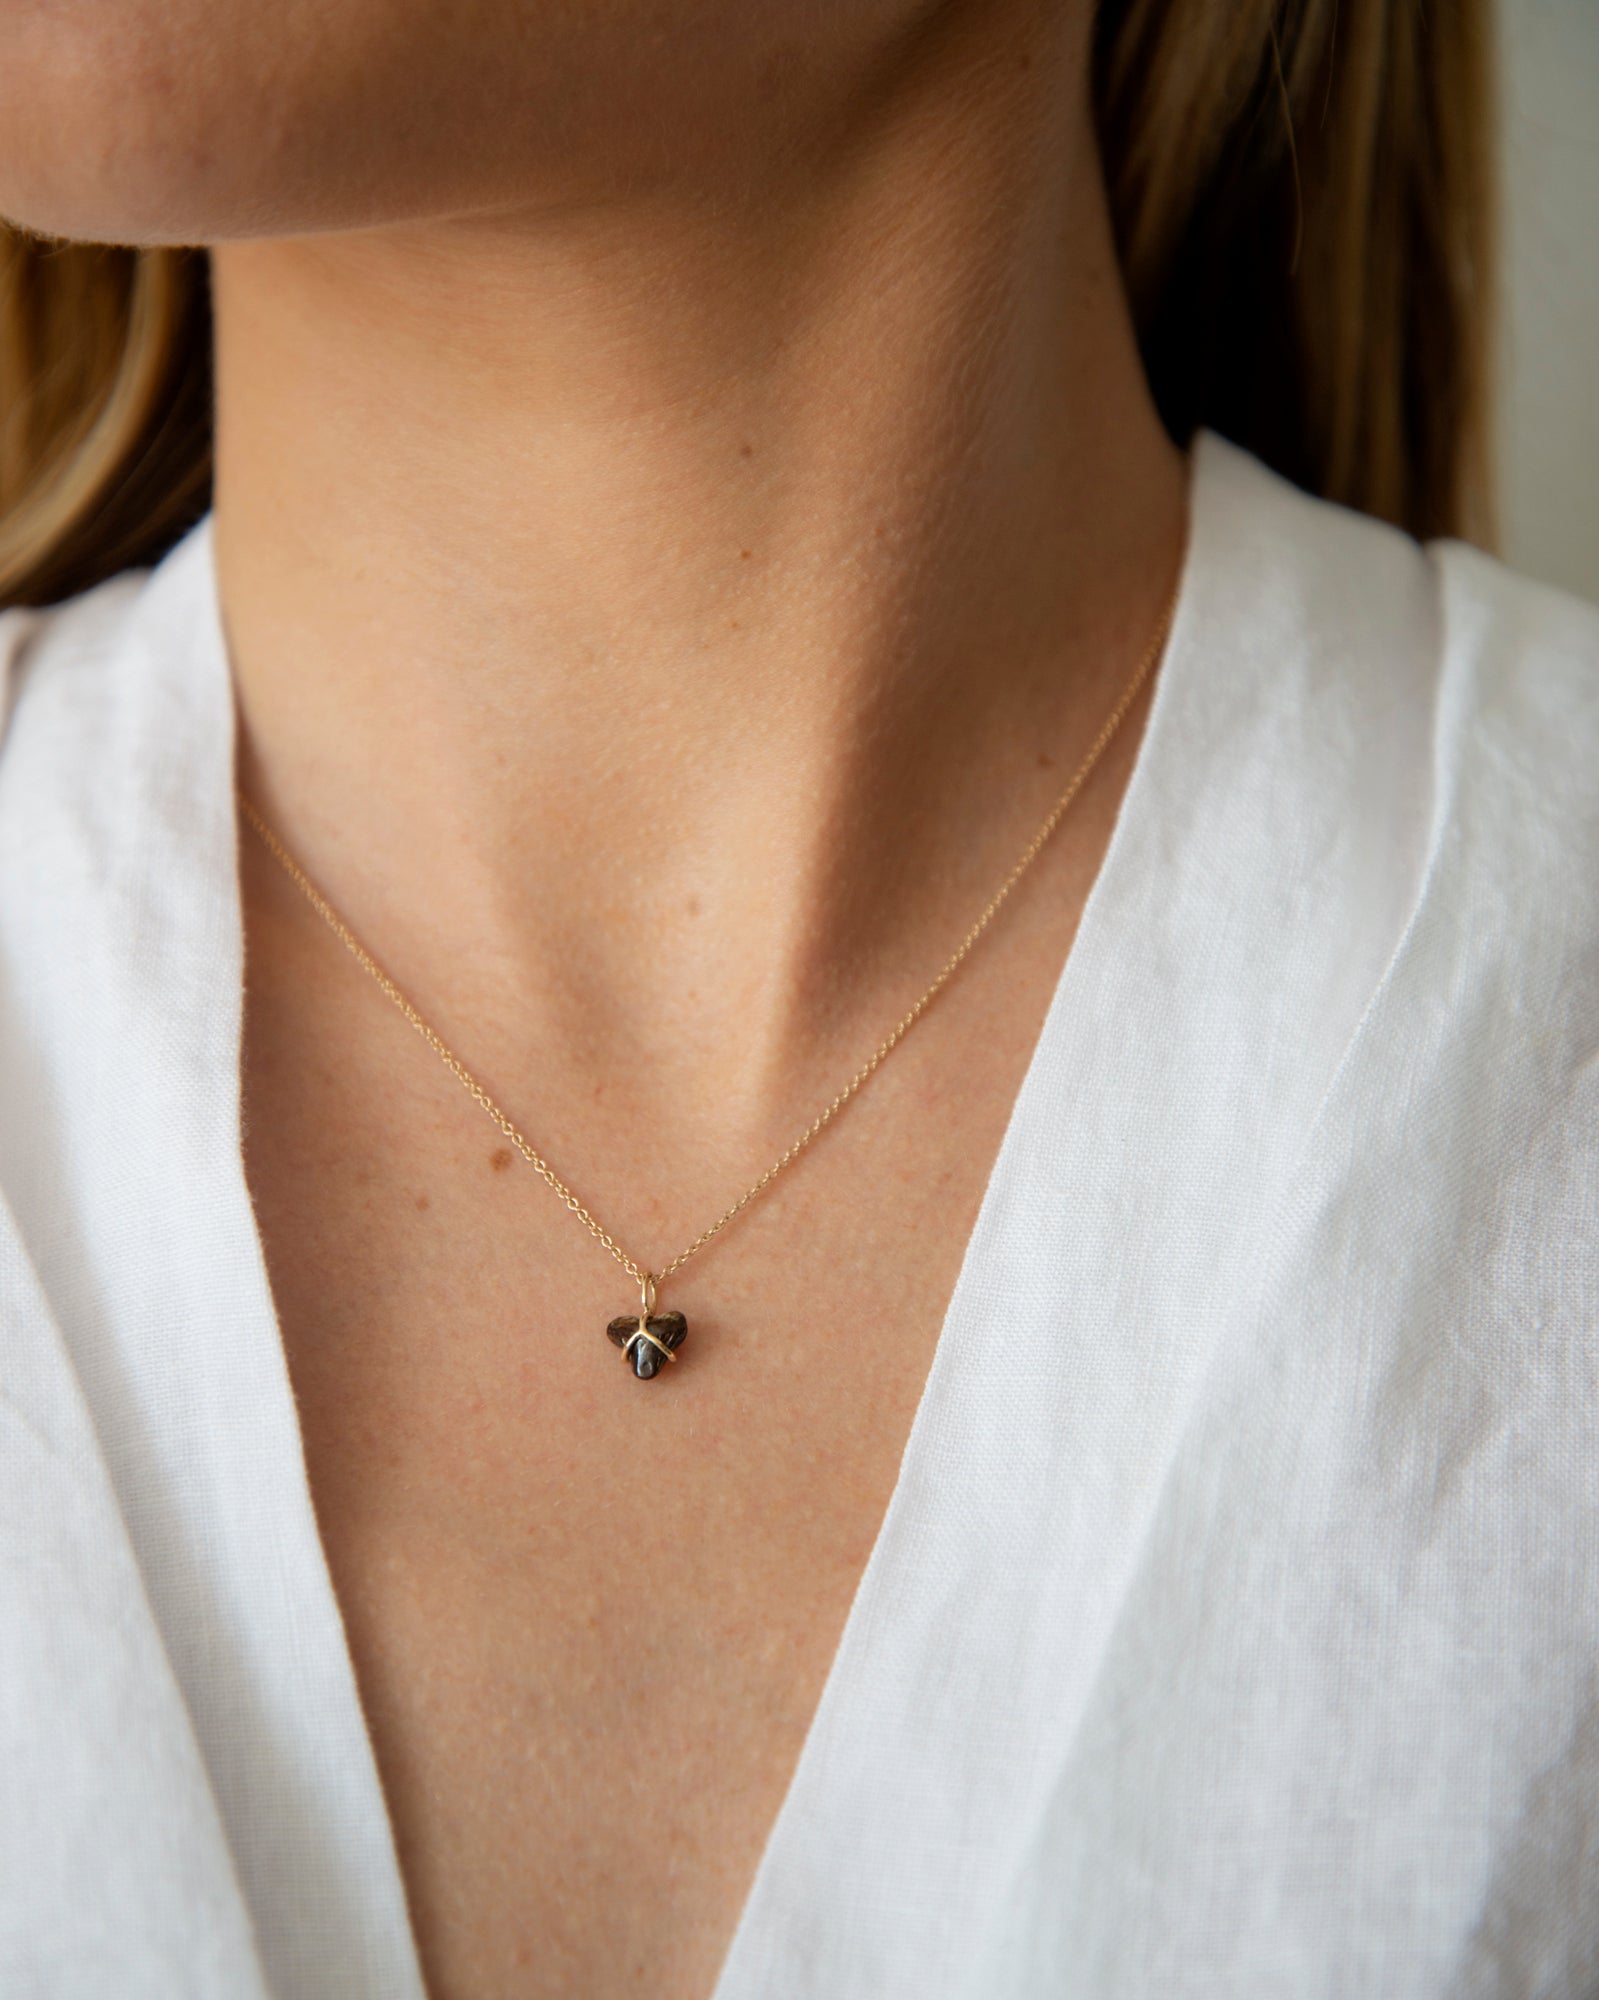 Petite Shark Tooth Necklace